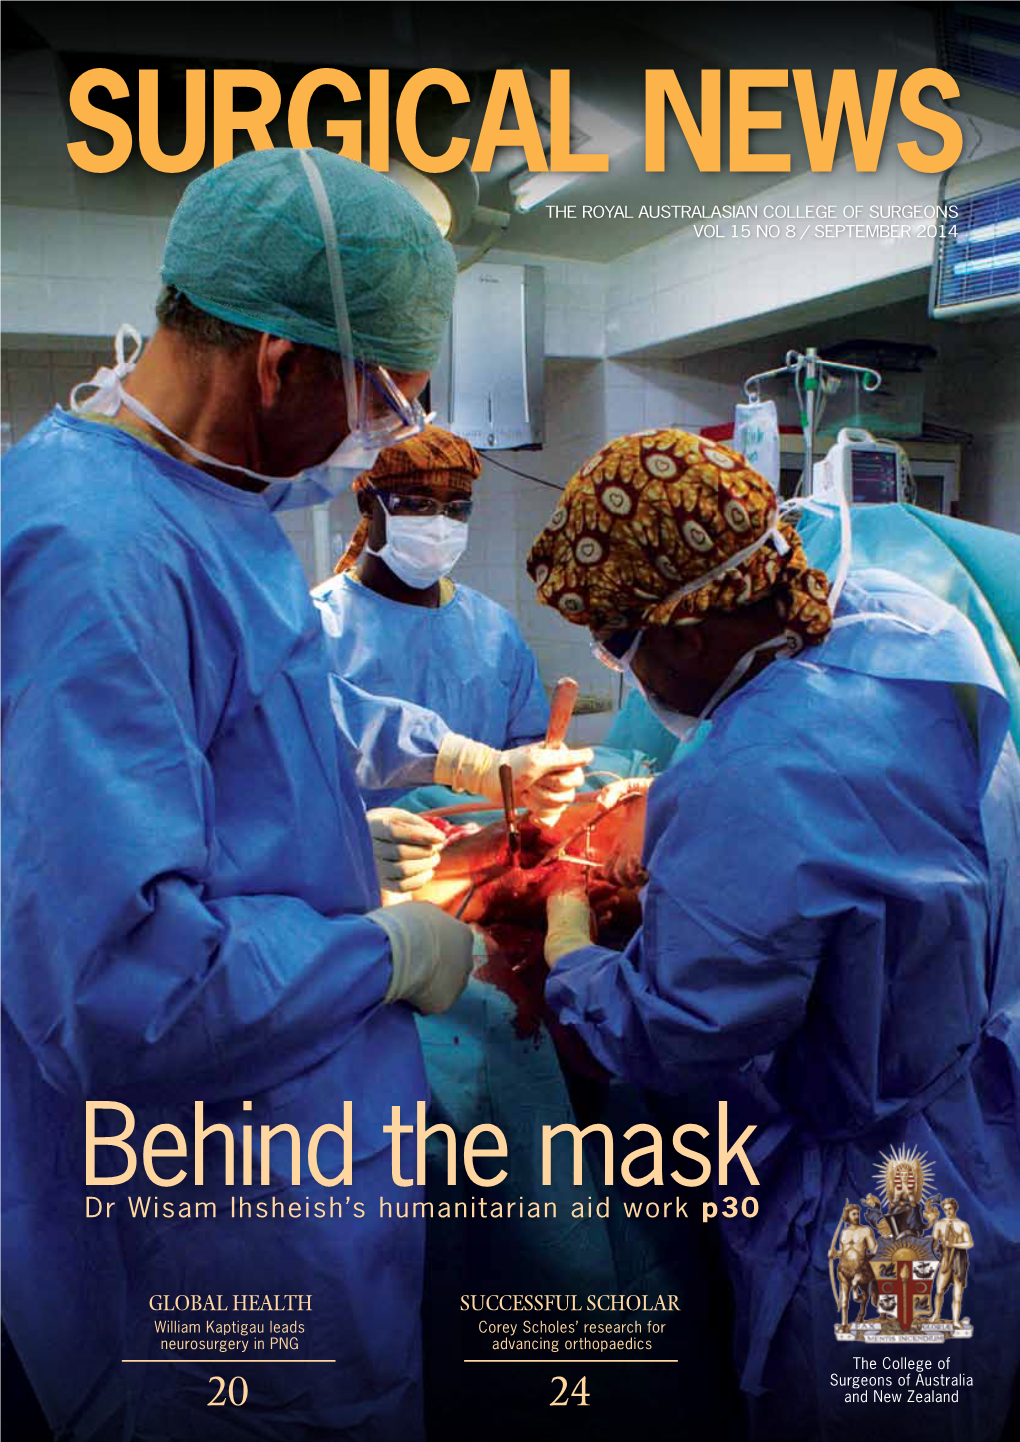 SURGICAL NEWS the Royal Australasian College of Surgeons Vol 15 No 8 / SEPTEMBER 2014